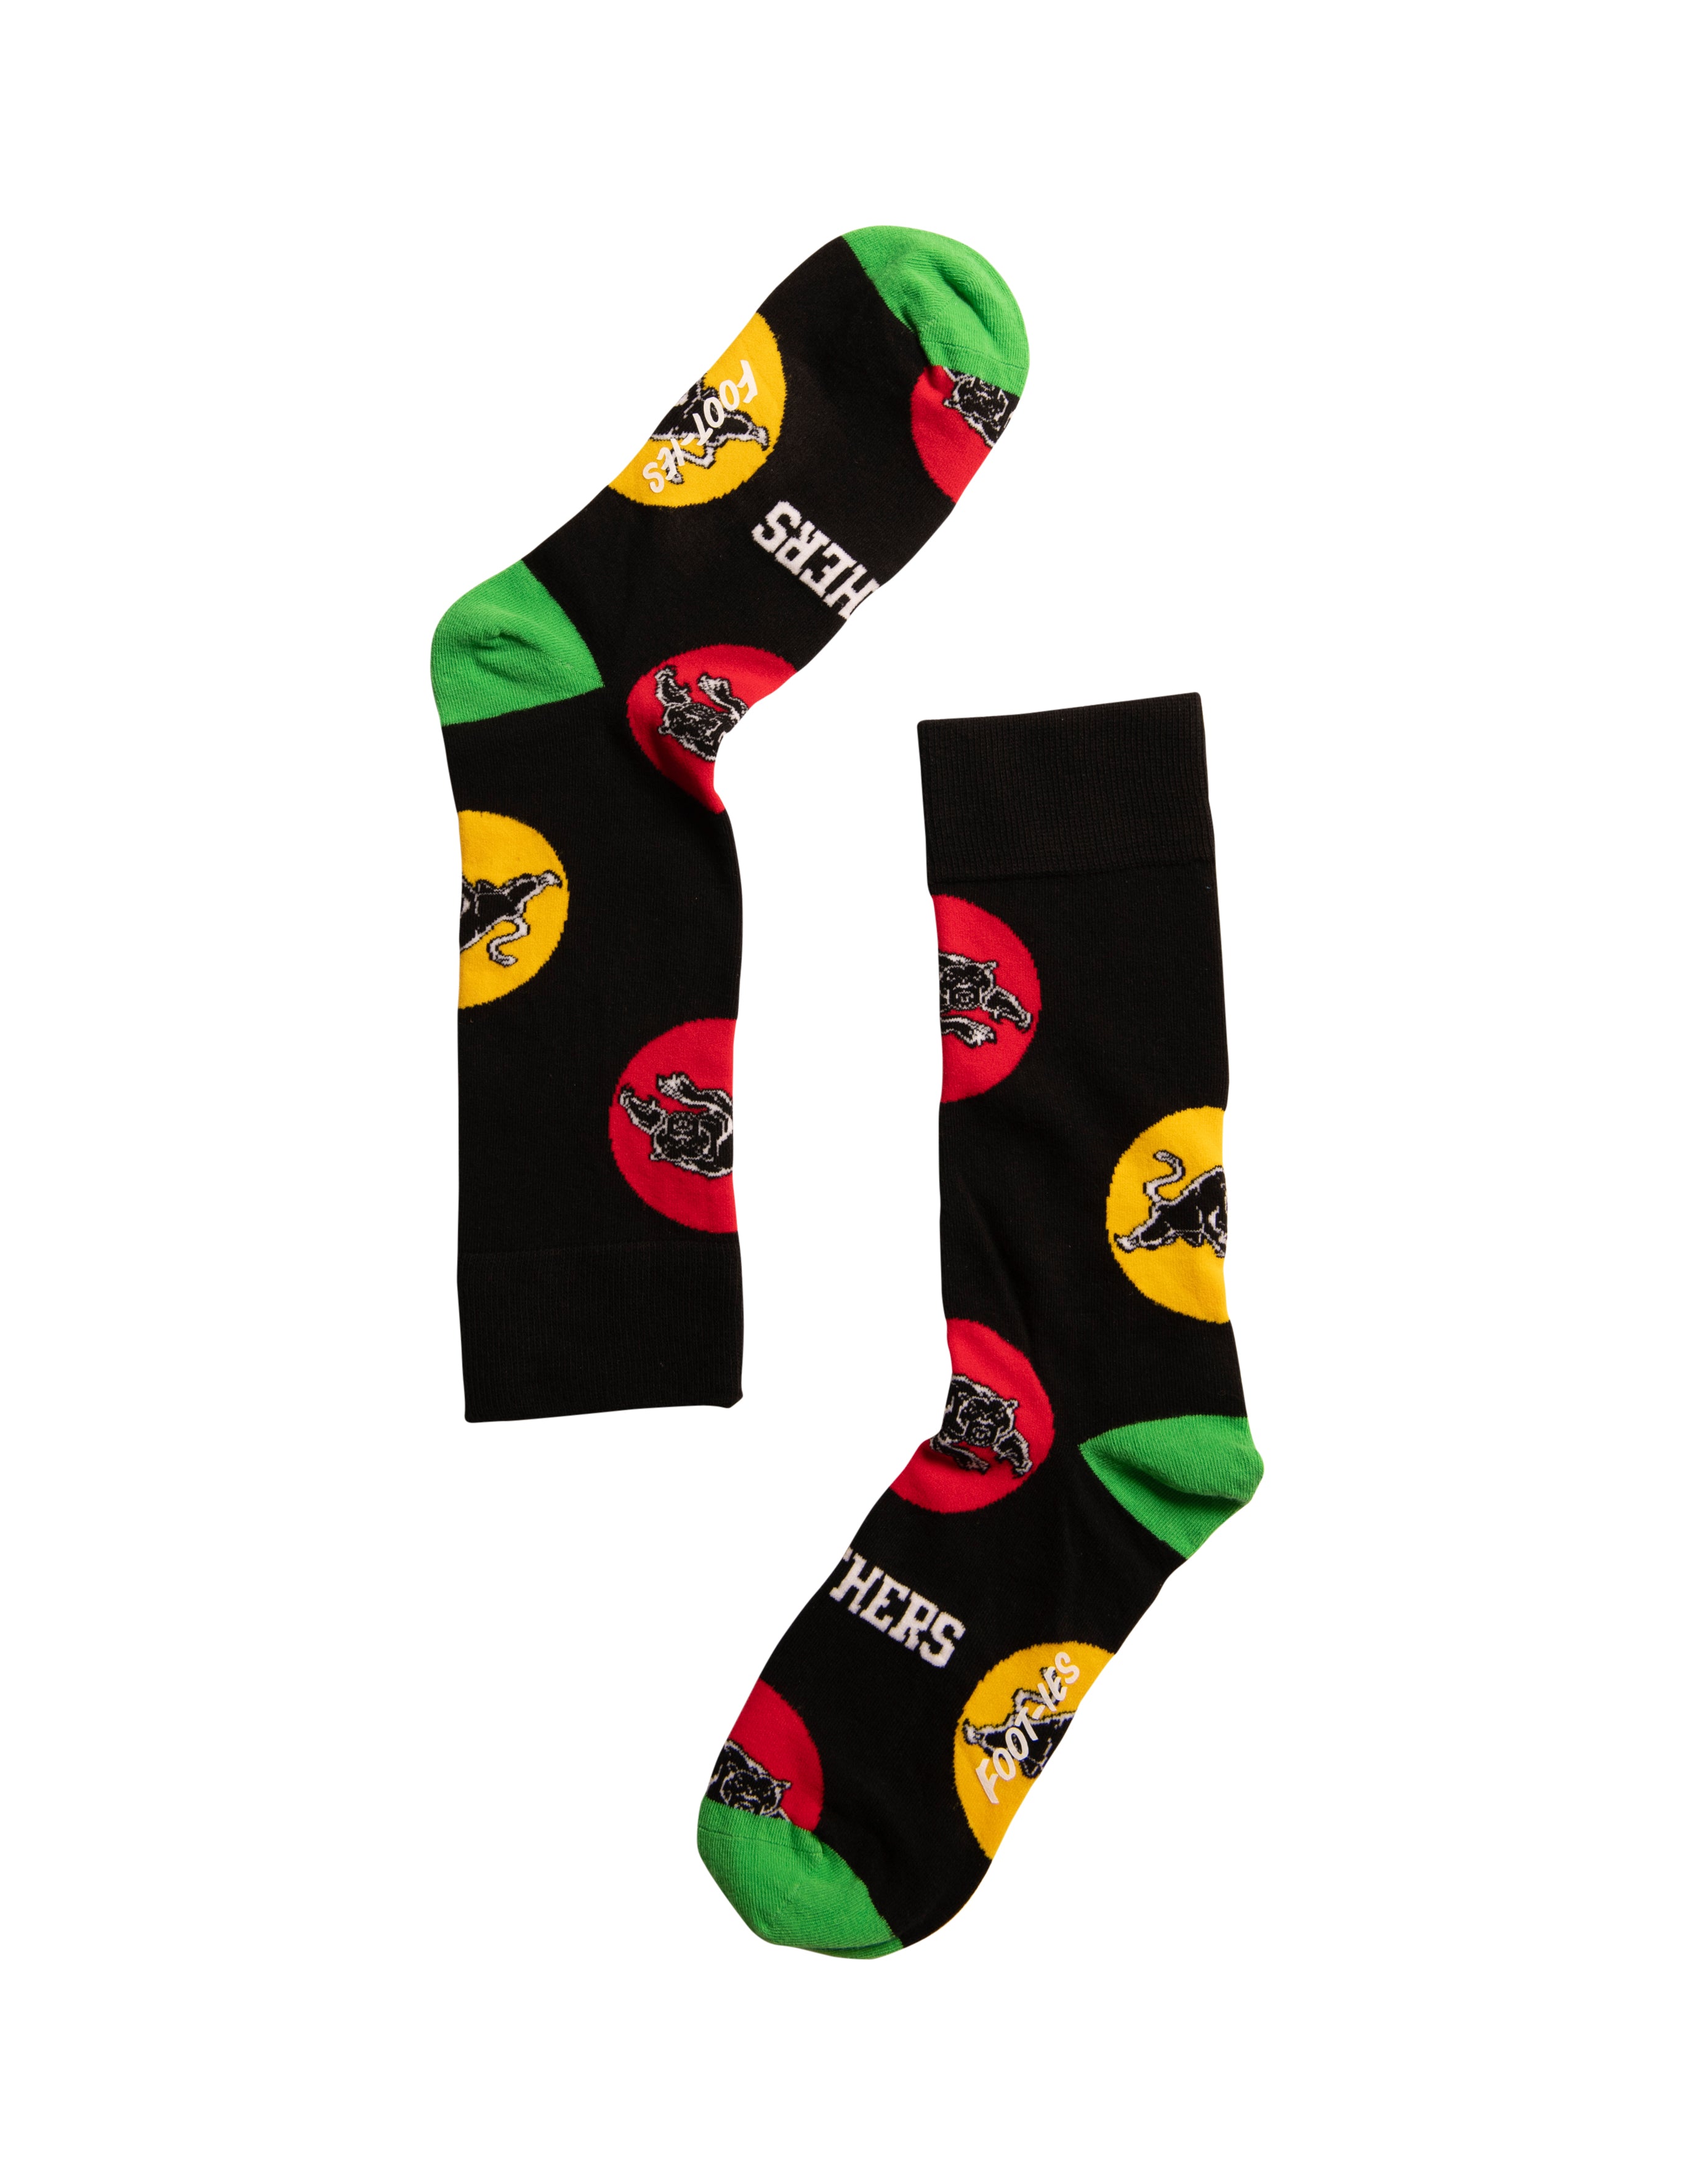 PENRITH PANTHERS NRL LOGO DOTS SOCKS M/L_PENRITH PANTHERS_STUBBY CLUB